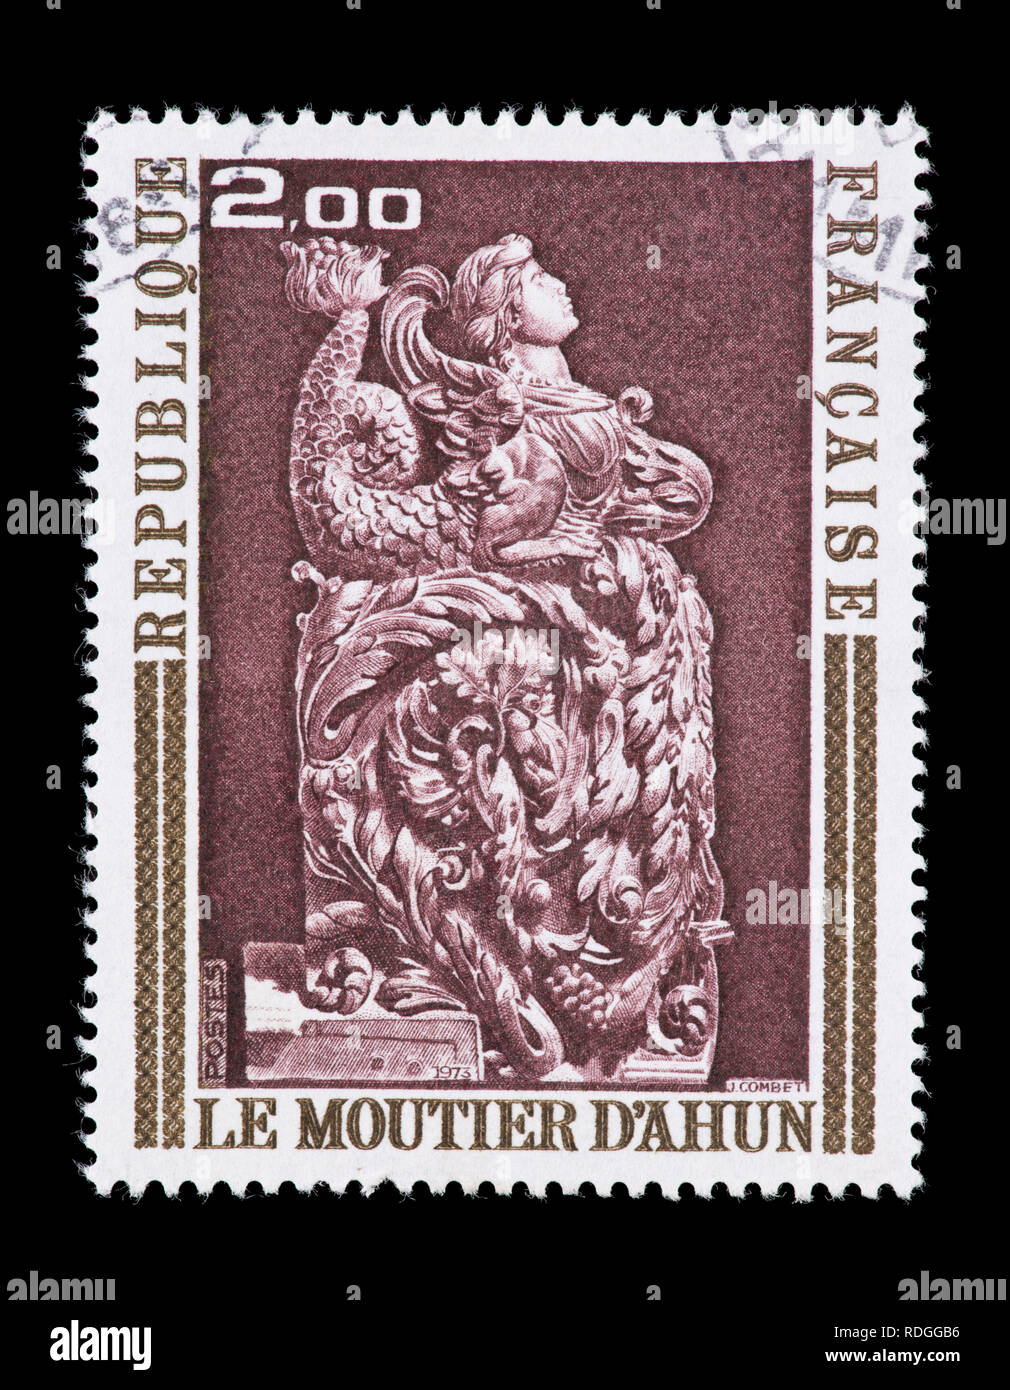 Postage stamp from France depicting the Moutier-D'ahun wood sculpture Angel Stock Photo